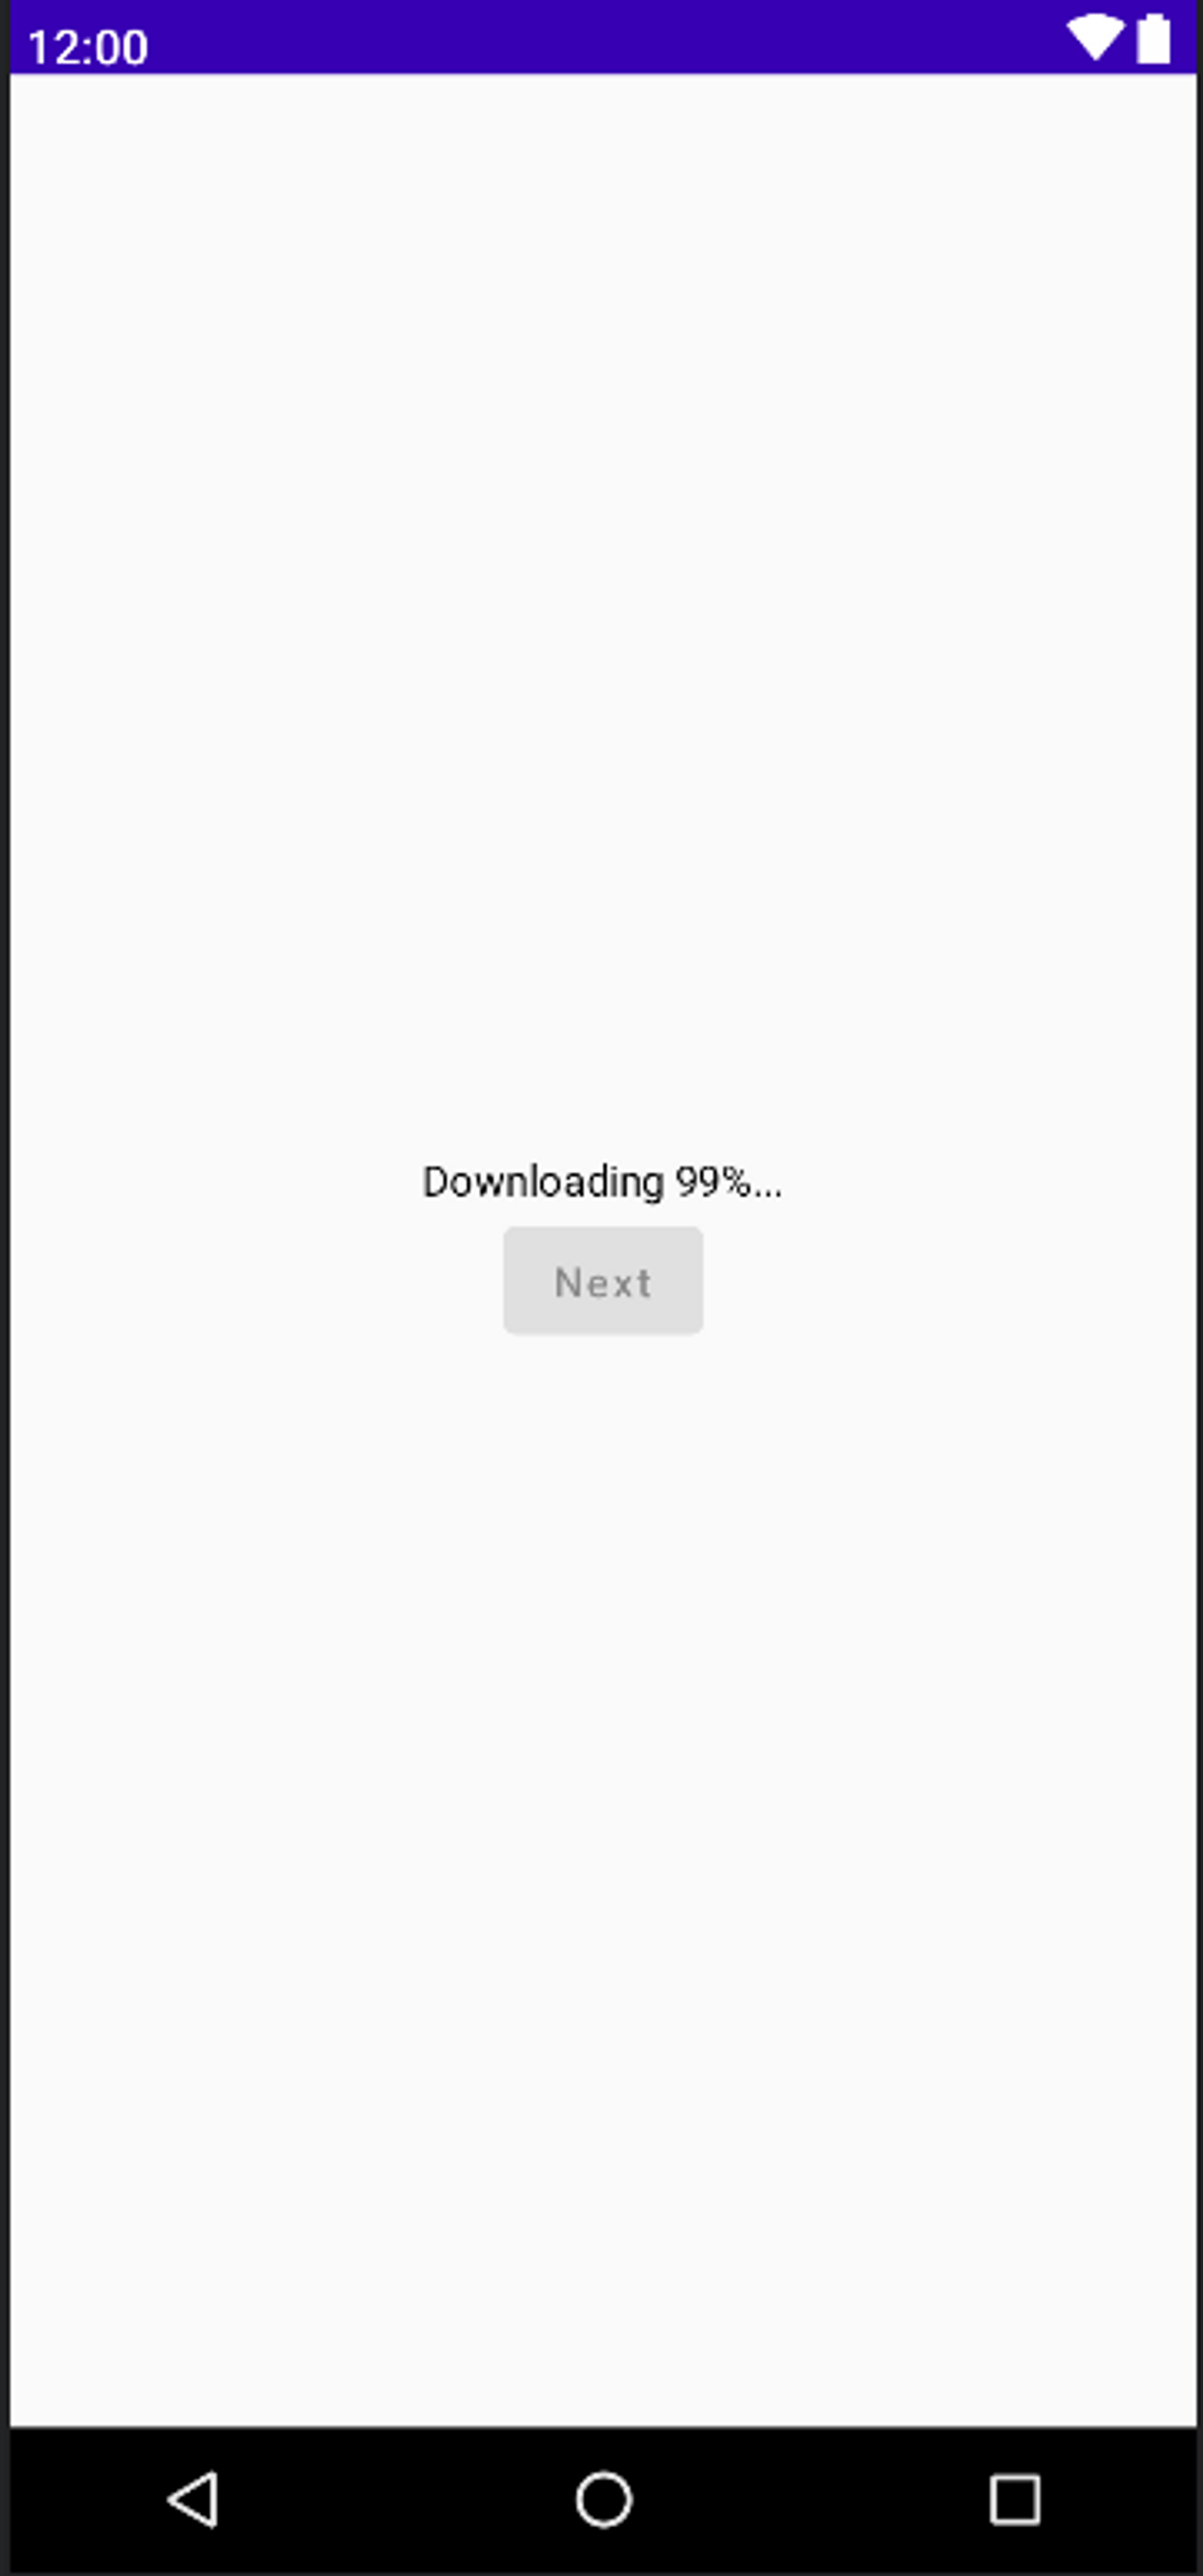 Preview showing 99% downloaded